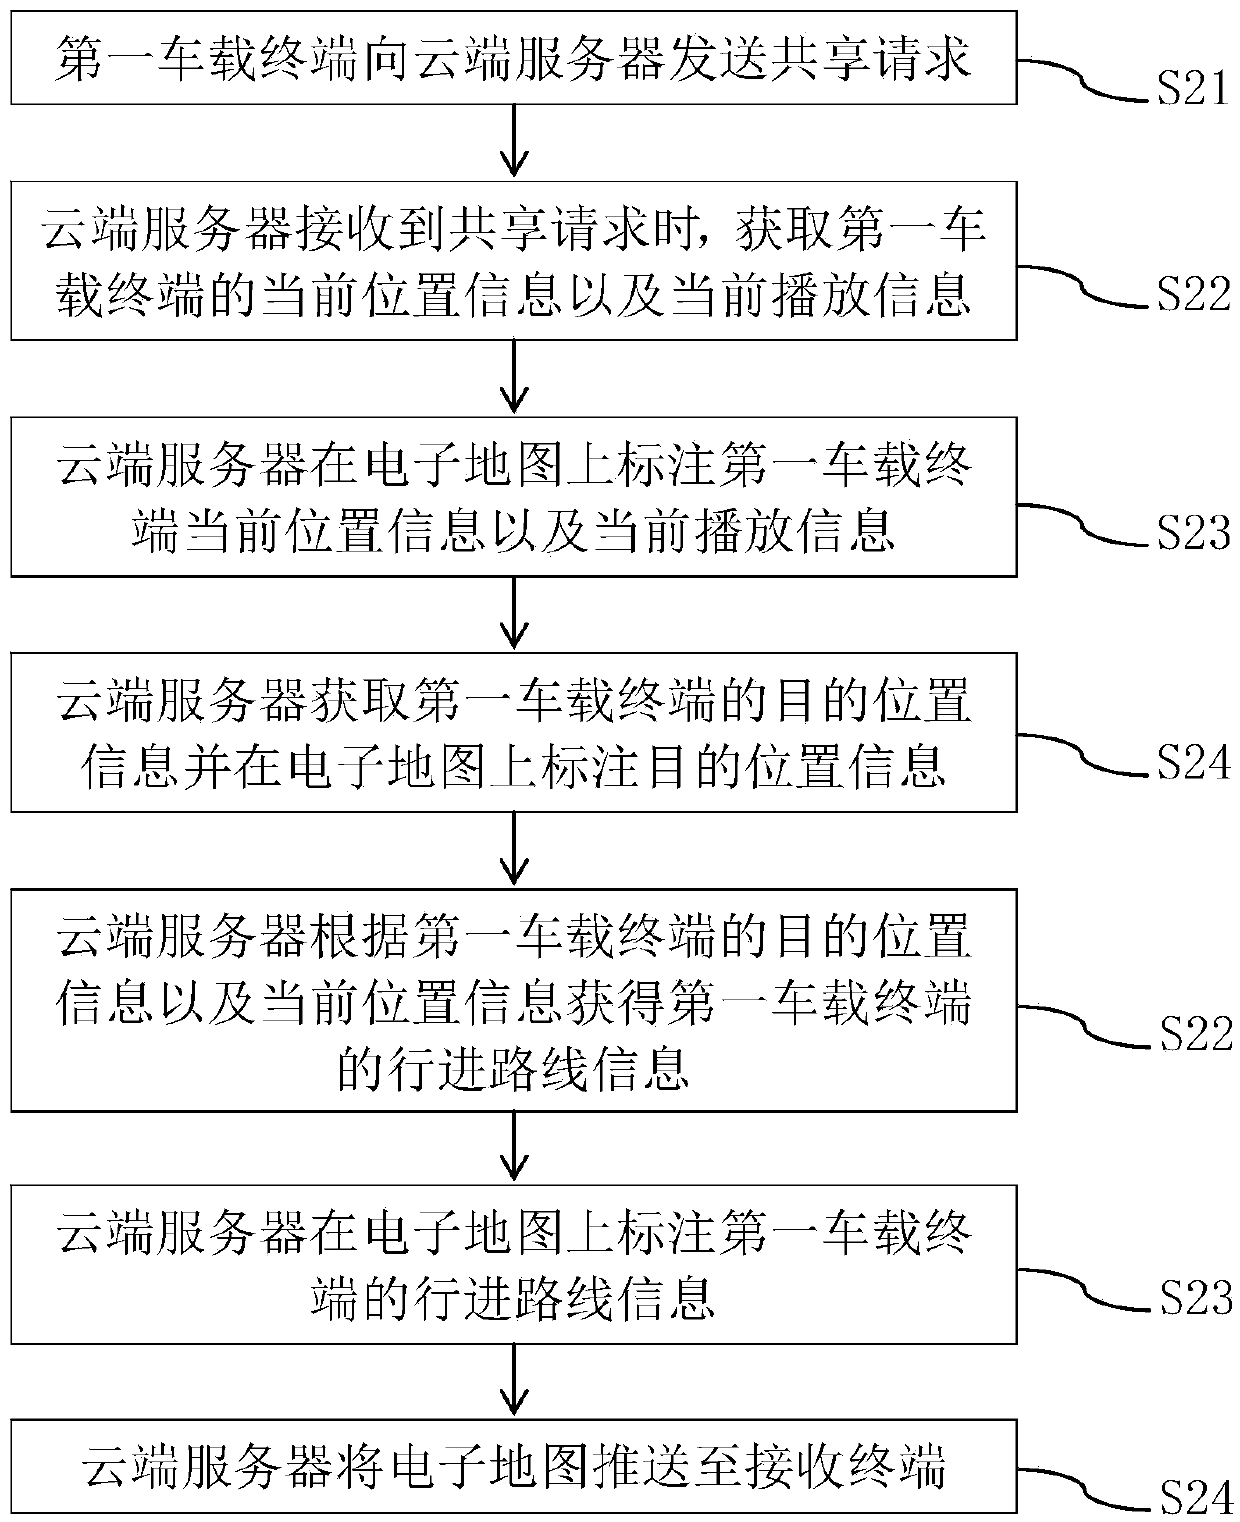 Audio sharing method and system